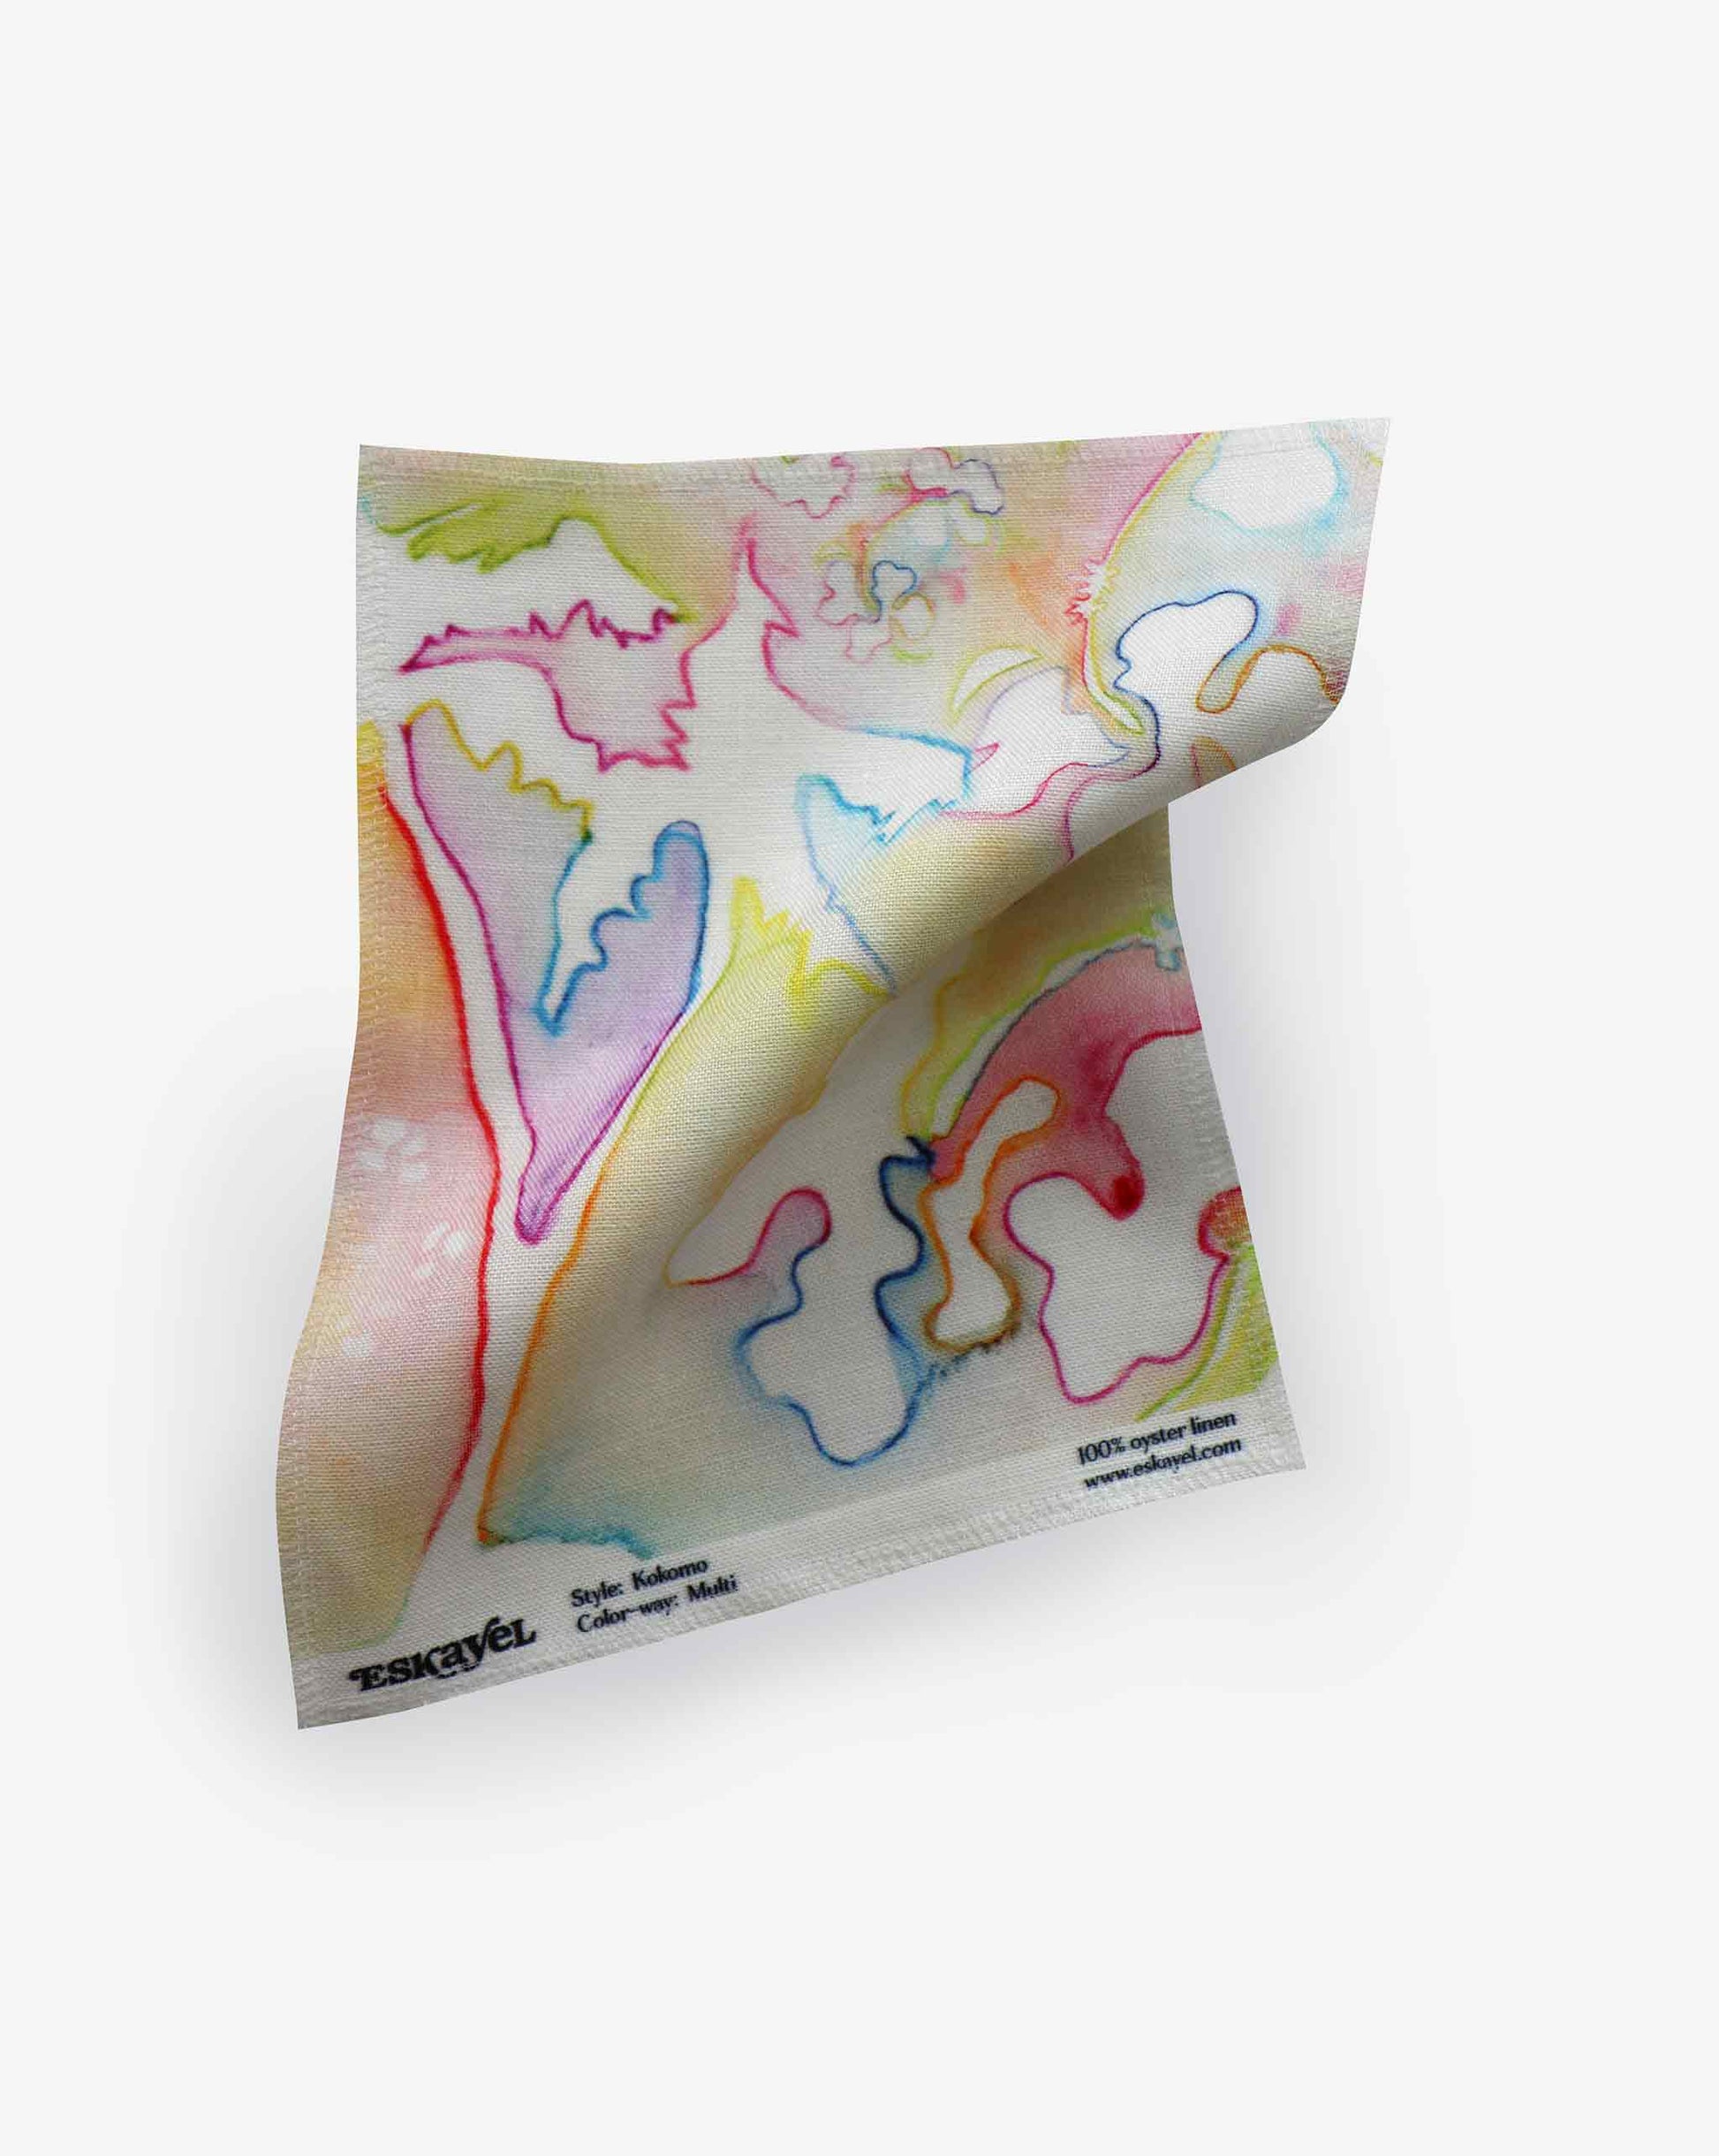 A small, colorful towel with abstract patterns in pastel hues, featuring pink, yellow, green, and blue. It is slightly crumpled and displays the text "Escavel" and "100% signature fabric" on the corner. Order a Kokomo Fabric Sample||Multi to feel the luxurious texture for yourself.